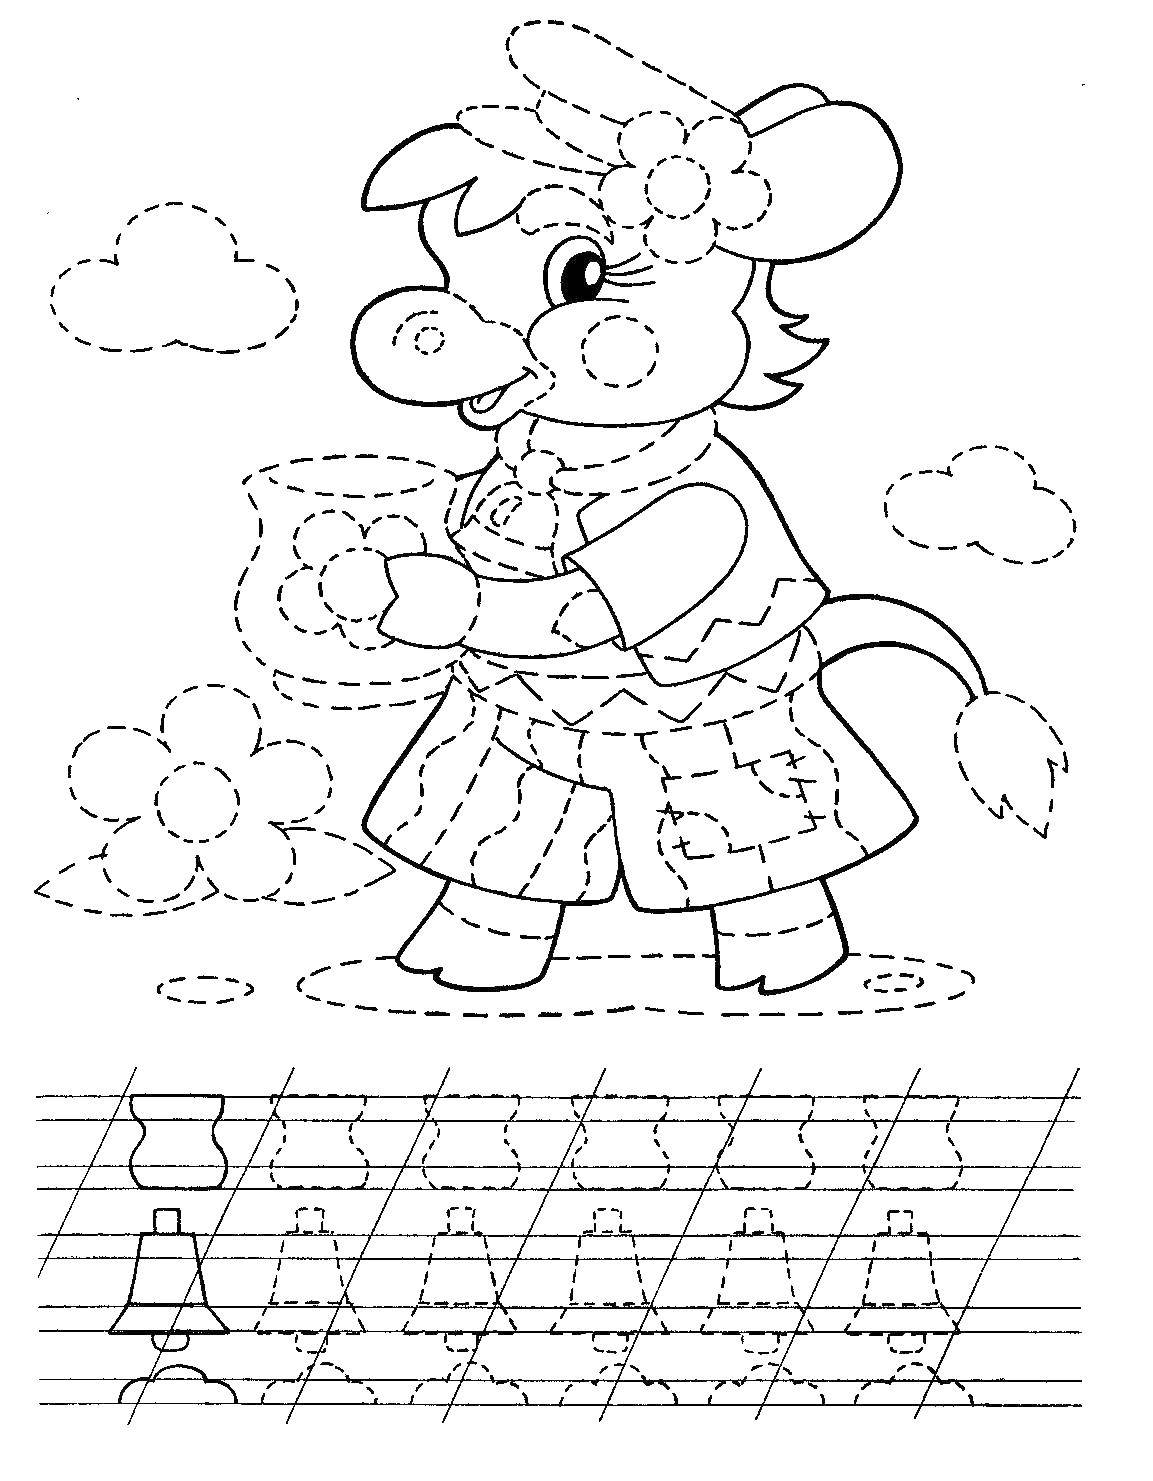 Coloring The thing with colt. Category school. Tags:  the recipe, a donkey, a vase, a bell.